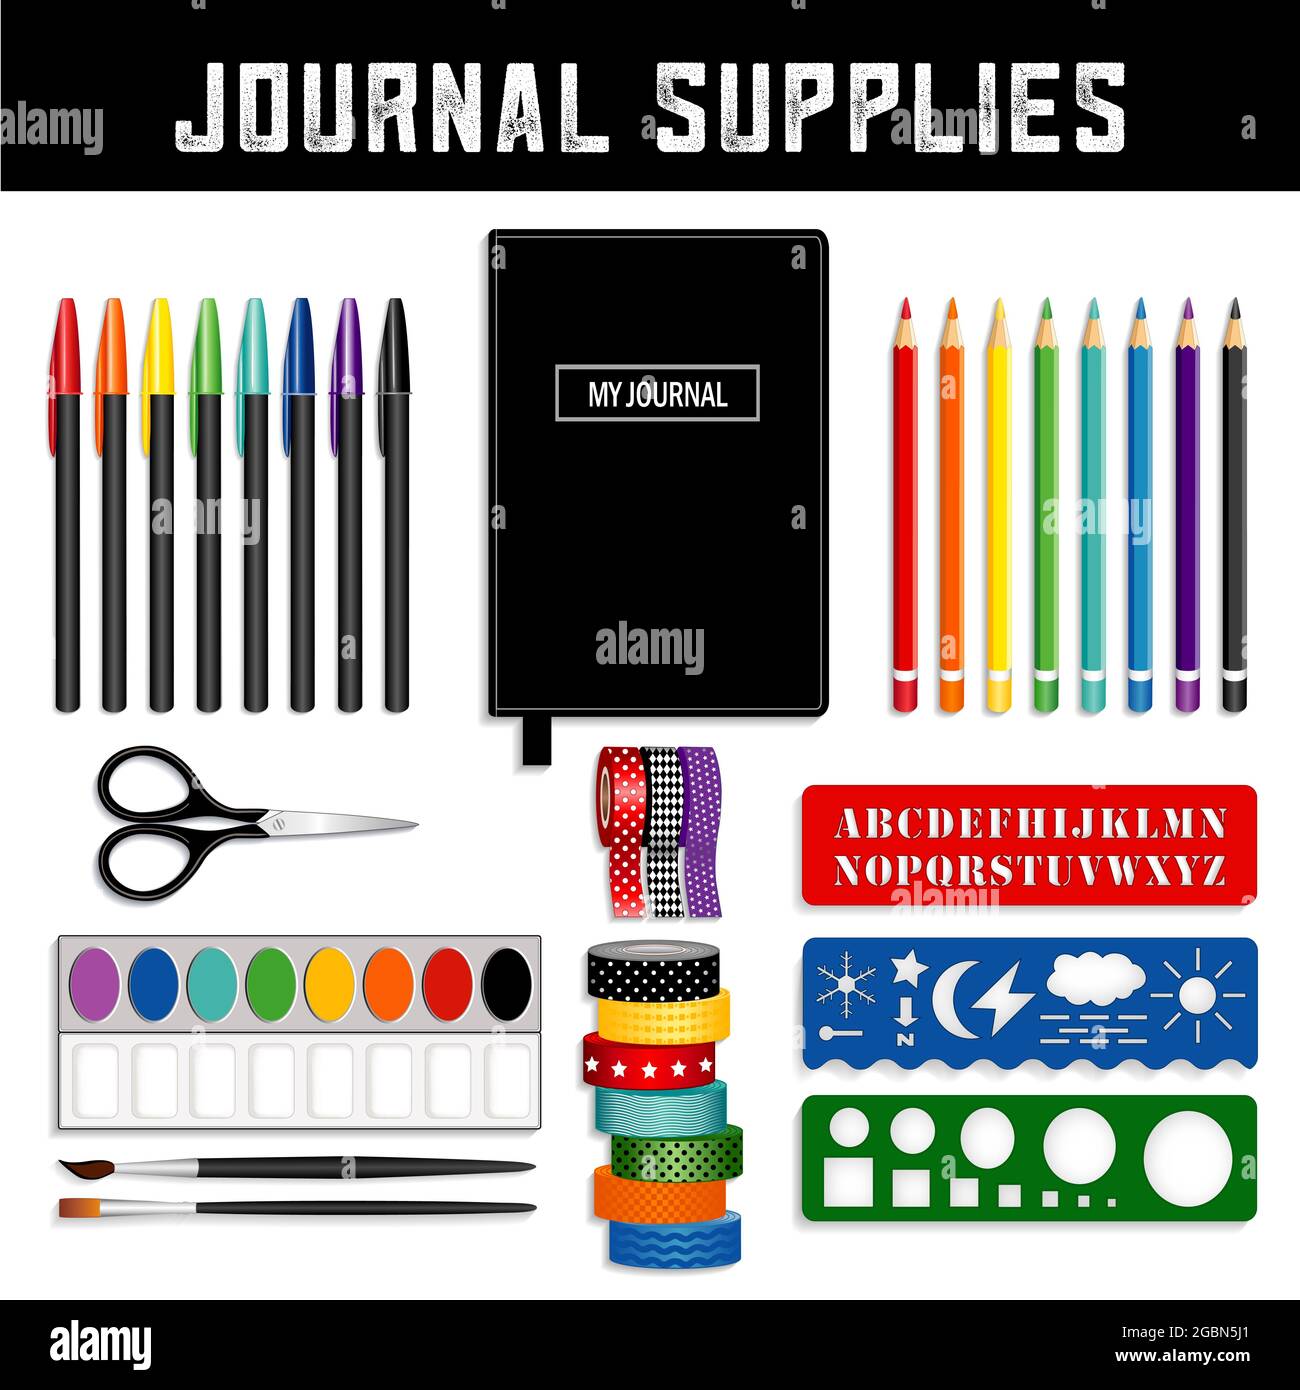 Journal Supplies for travel logs, bullet books, day books, diaries, planners: watercolors, brushes, stencils, washi tapes, colored pencils, isolated Stock Photo